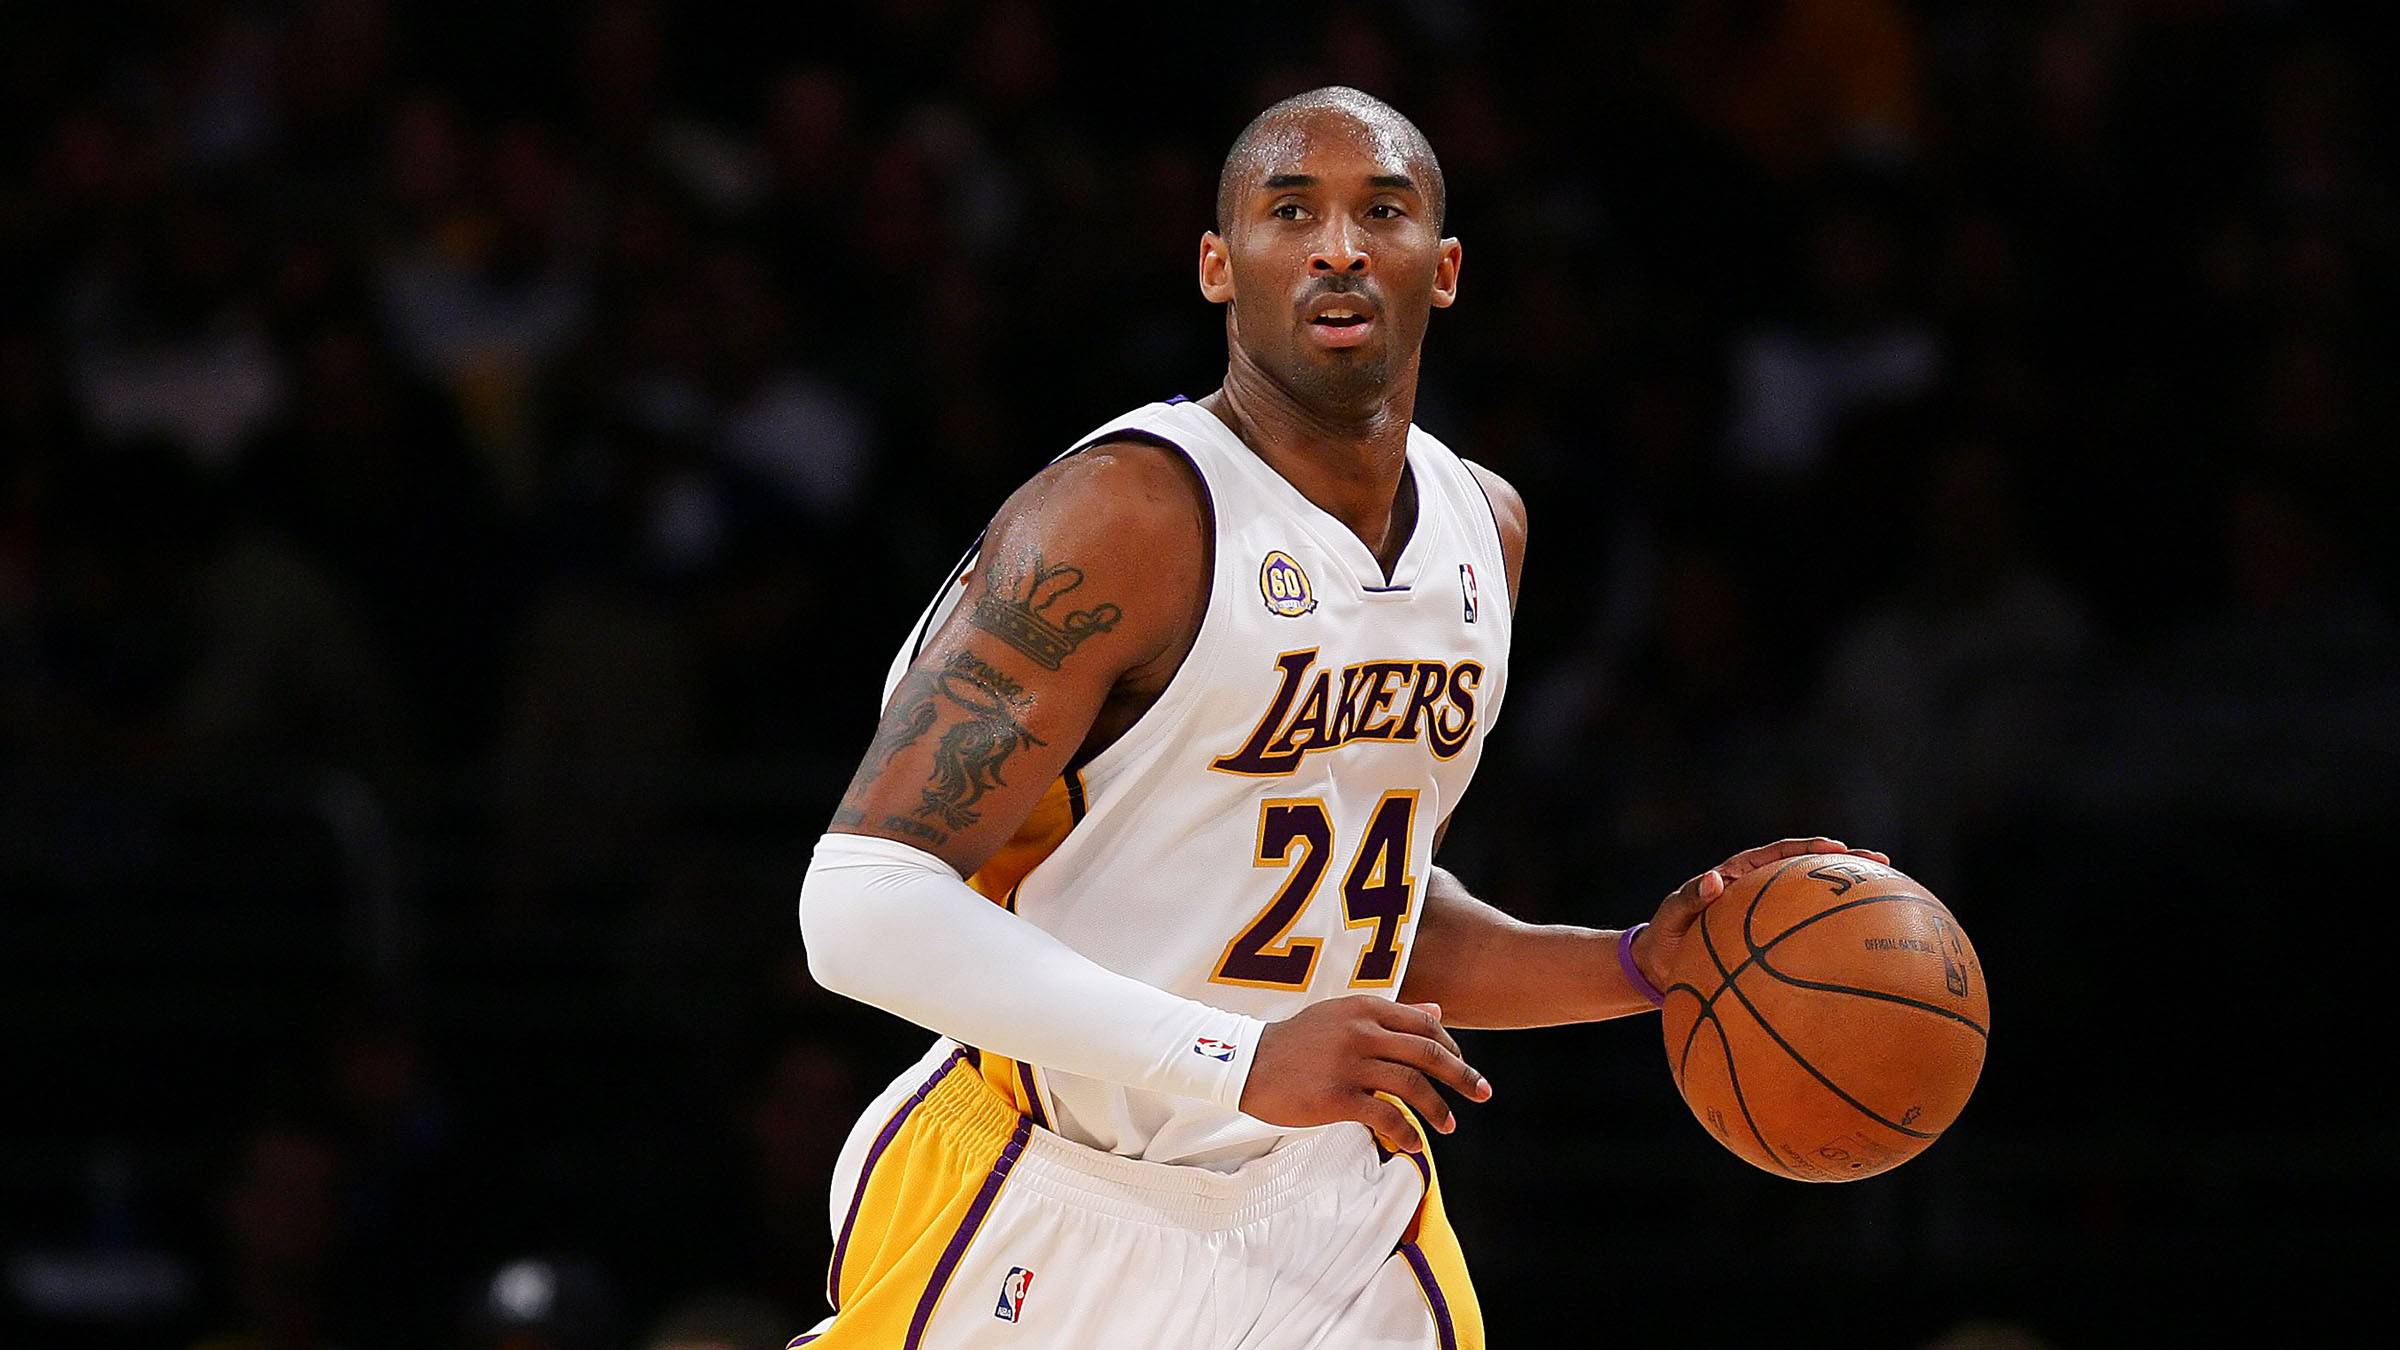 Kobe Bryant - NBA - Image 1 from Off-The-Court Fashion